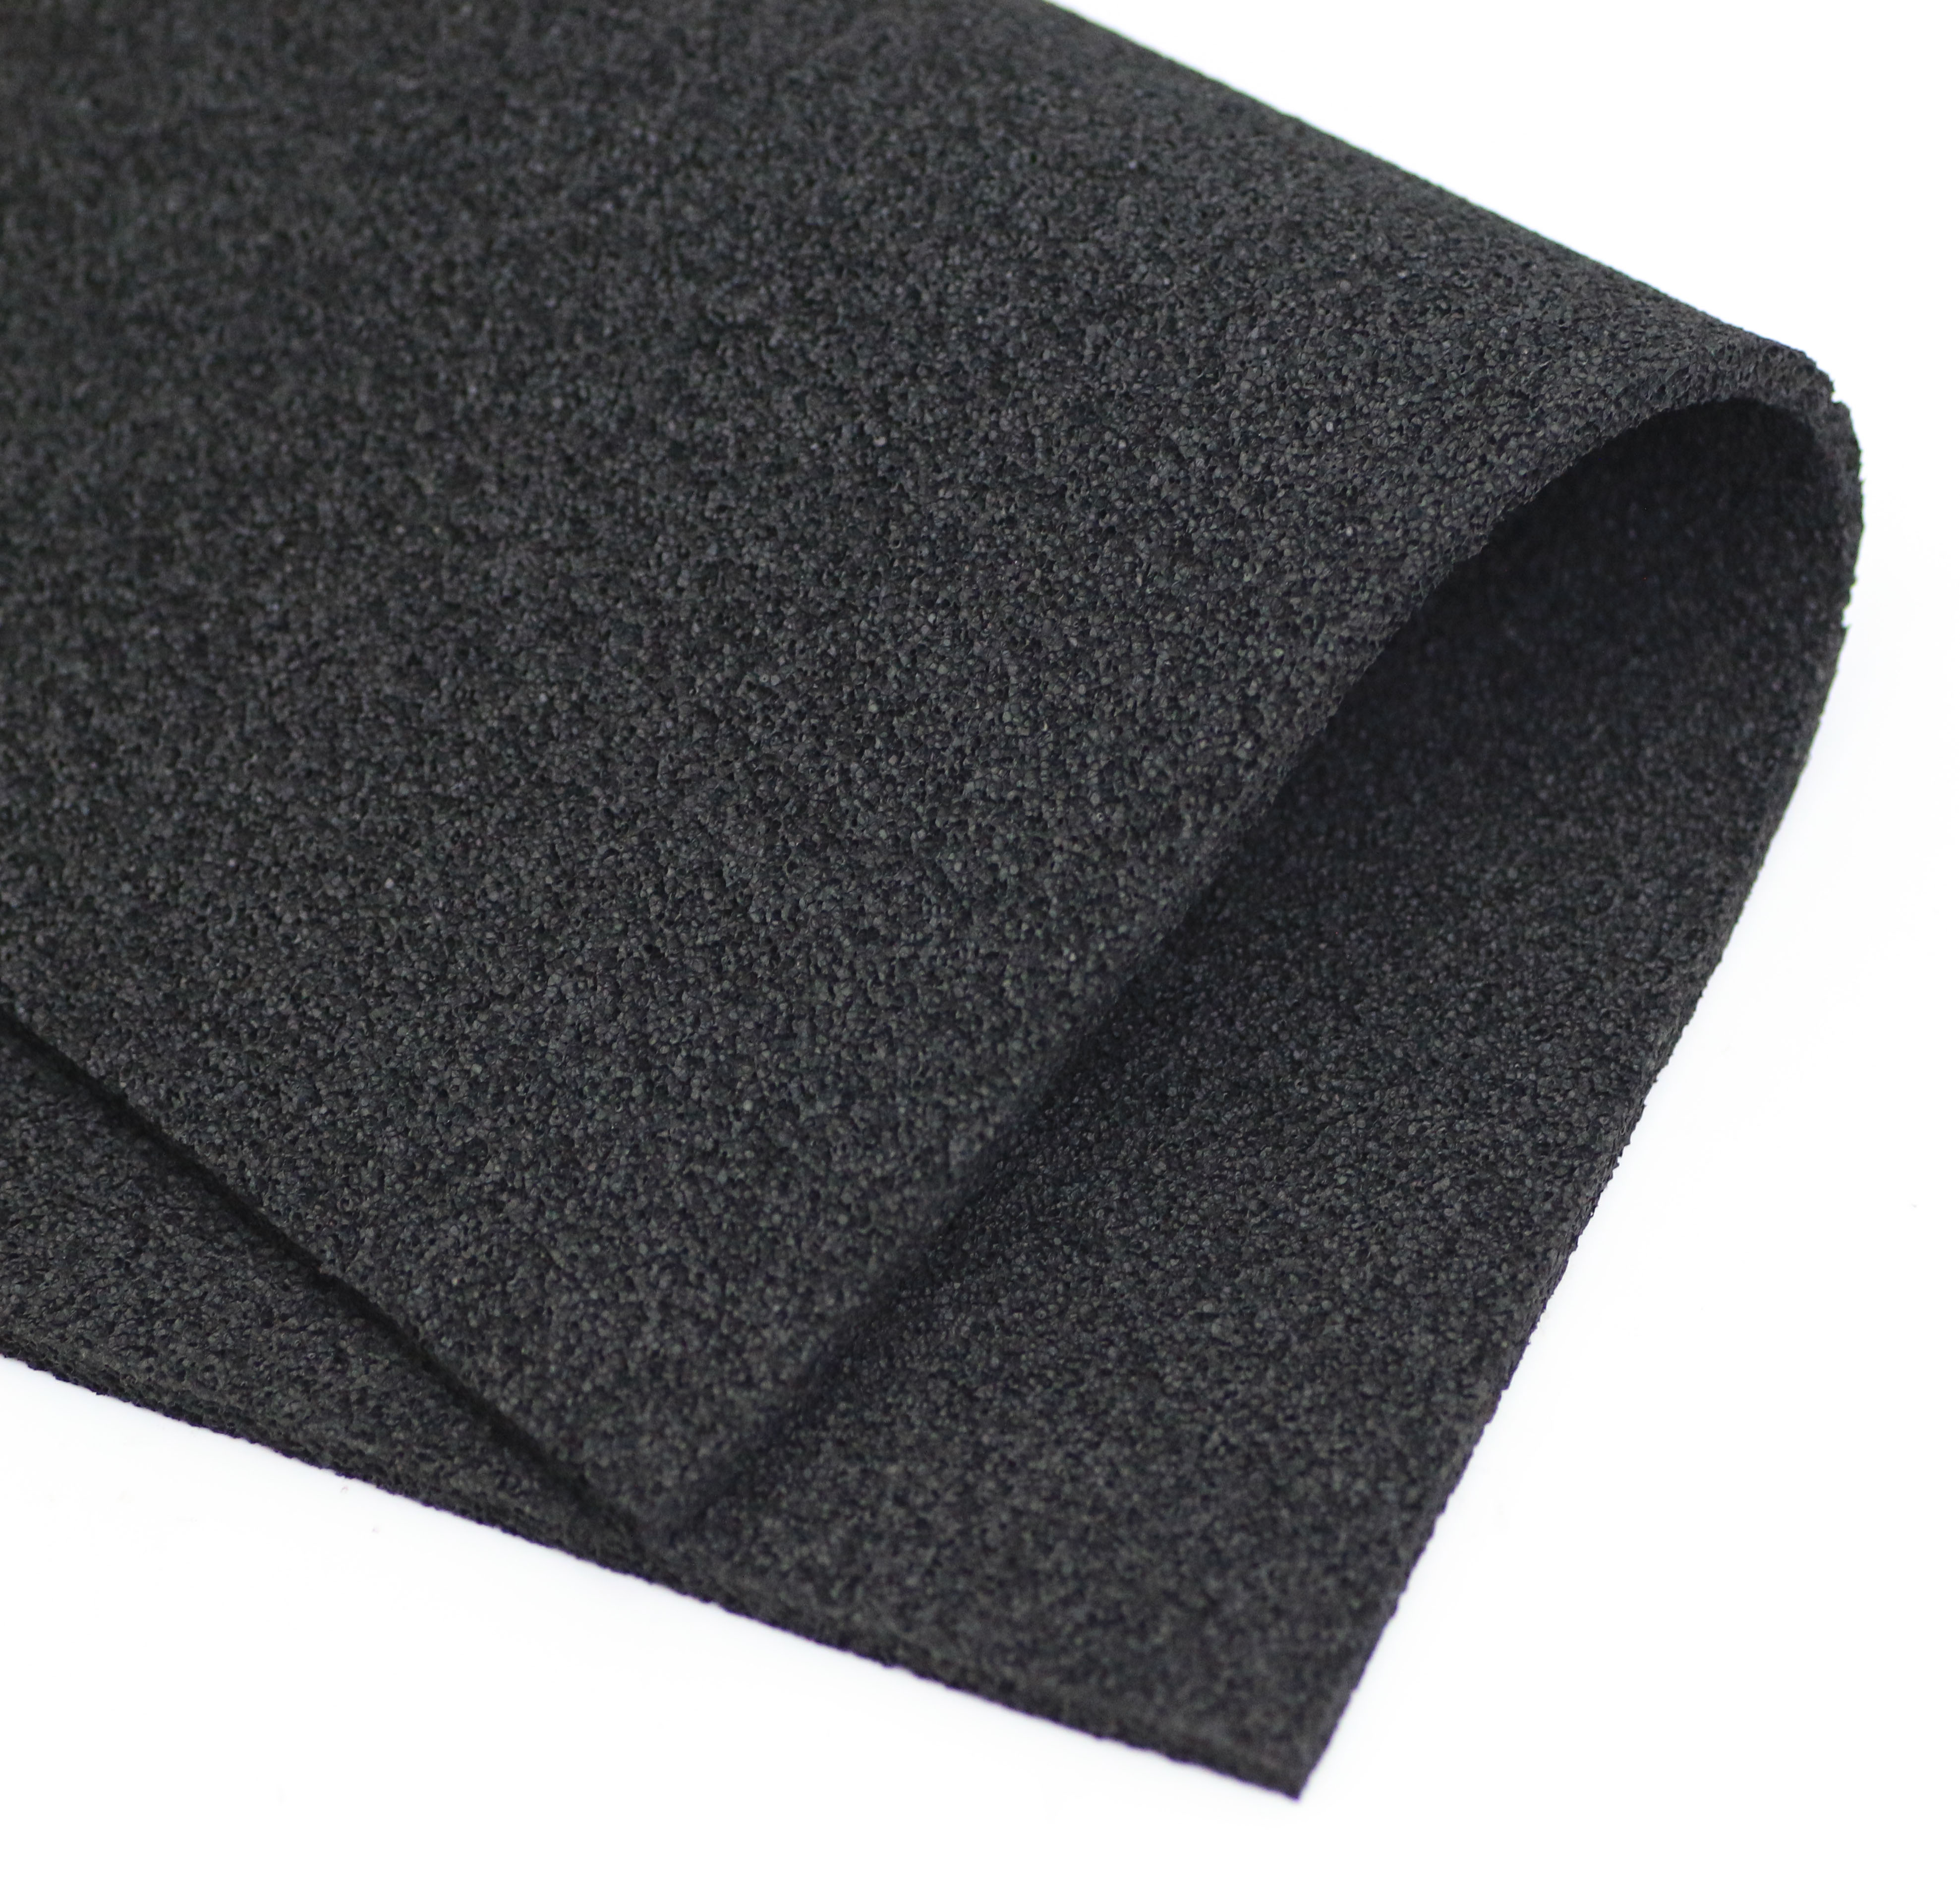 10mm THICK 8x5 SOFT GREY OPEN CELL FOAM SPONGE SHEET FOR CRAFT DIY  SUPPORT